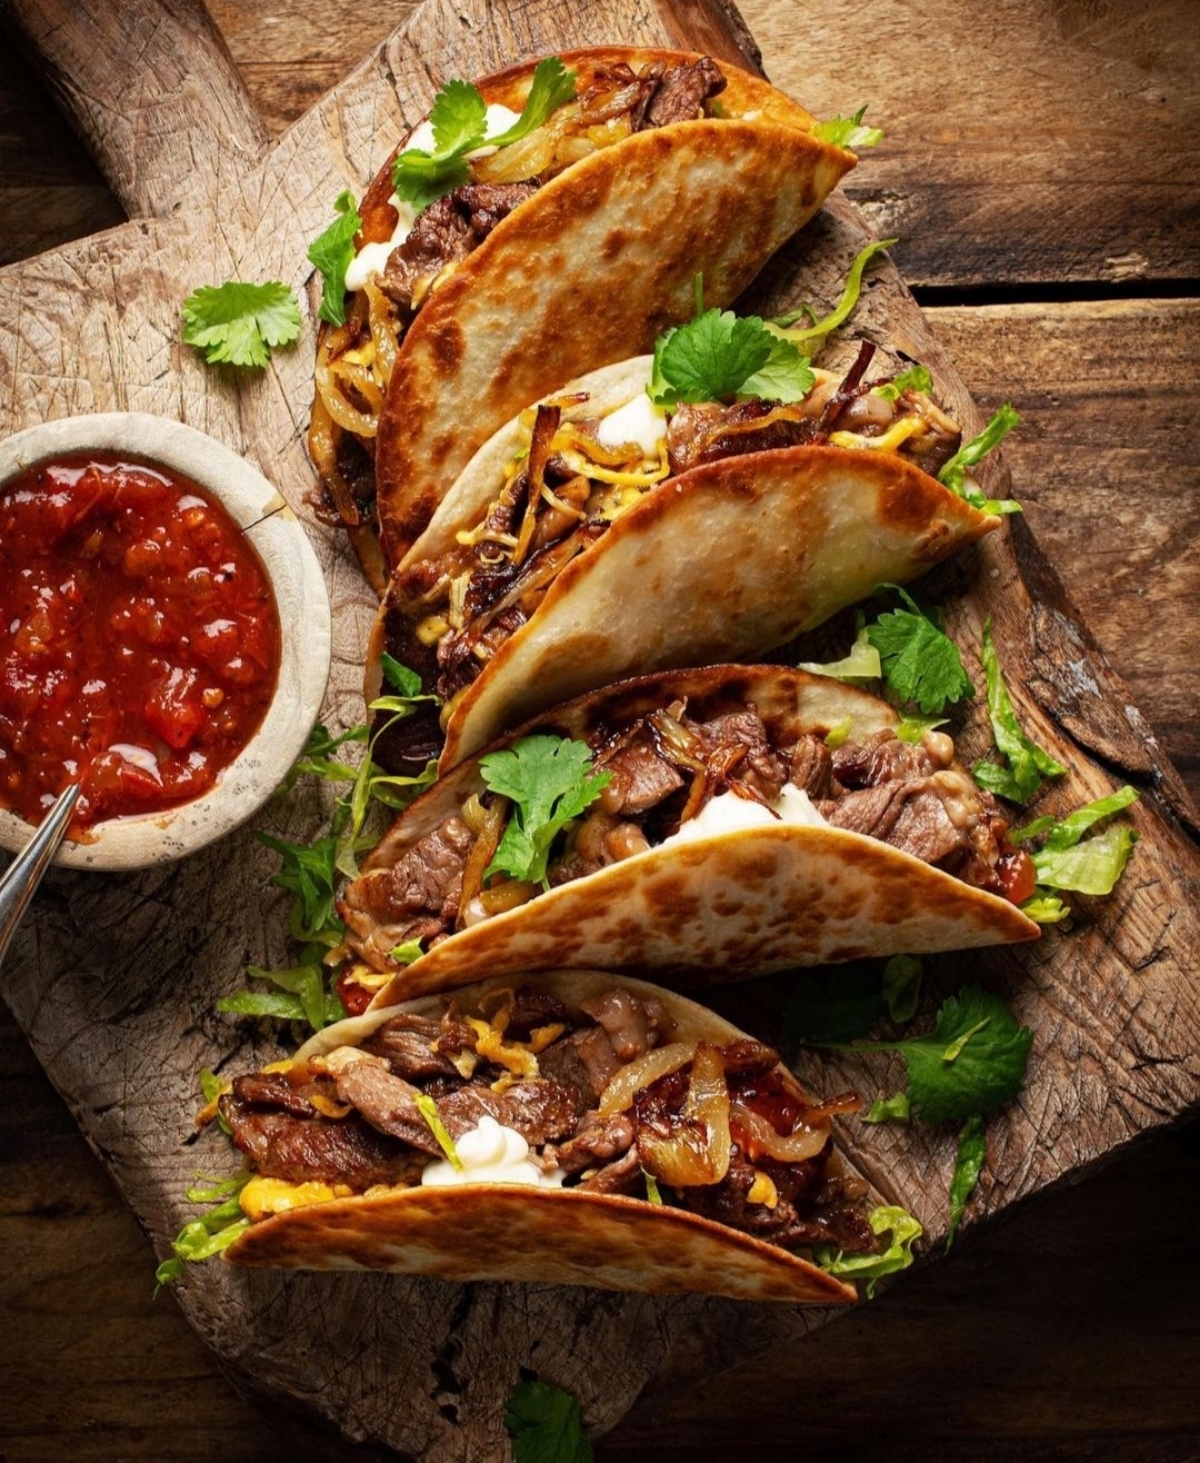 TACOS BY RESERVOIR DOGS FOOD